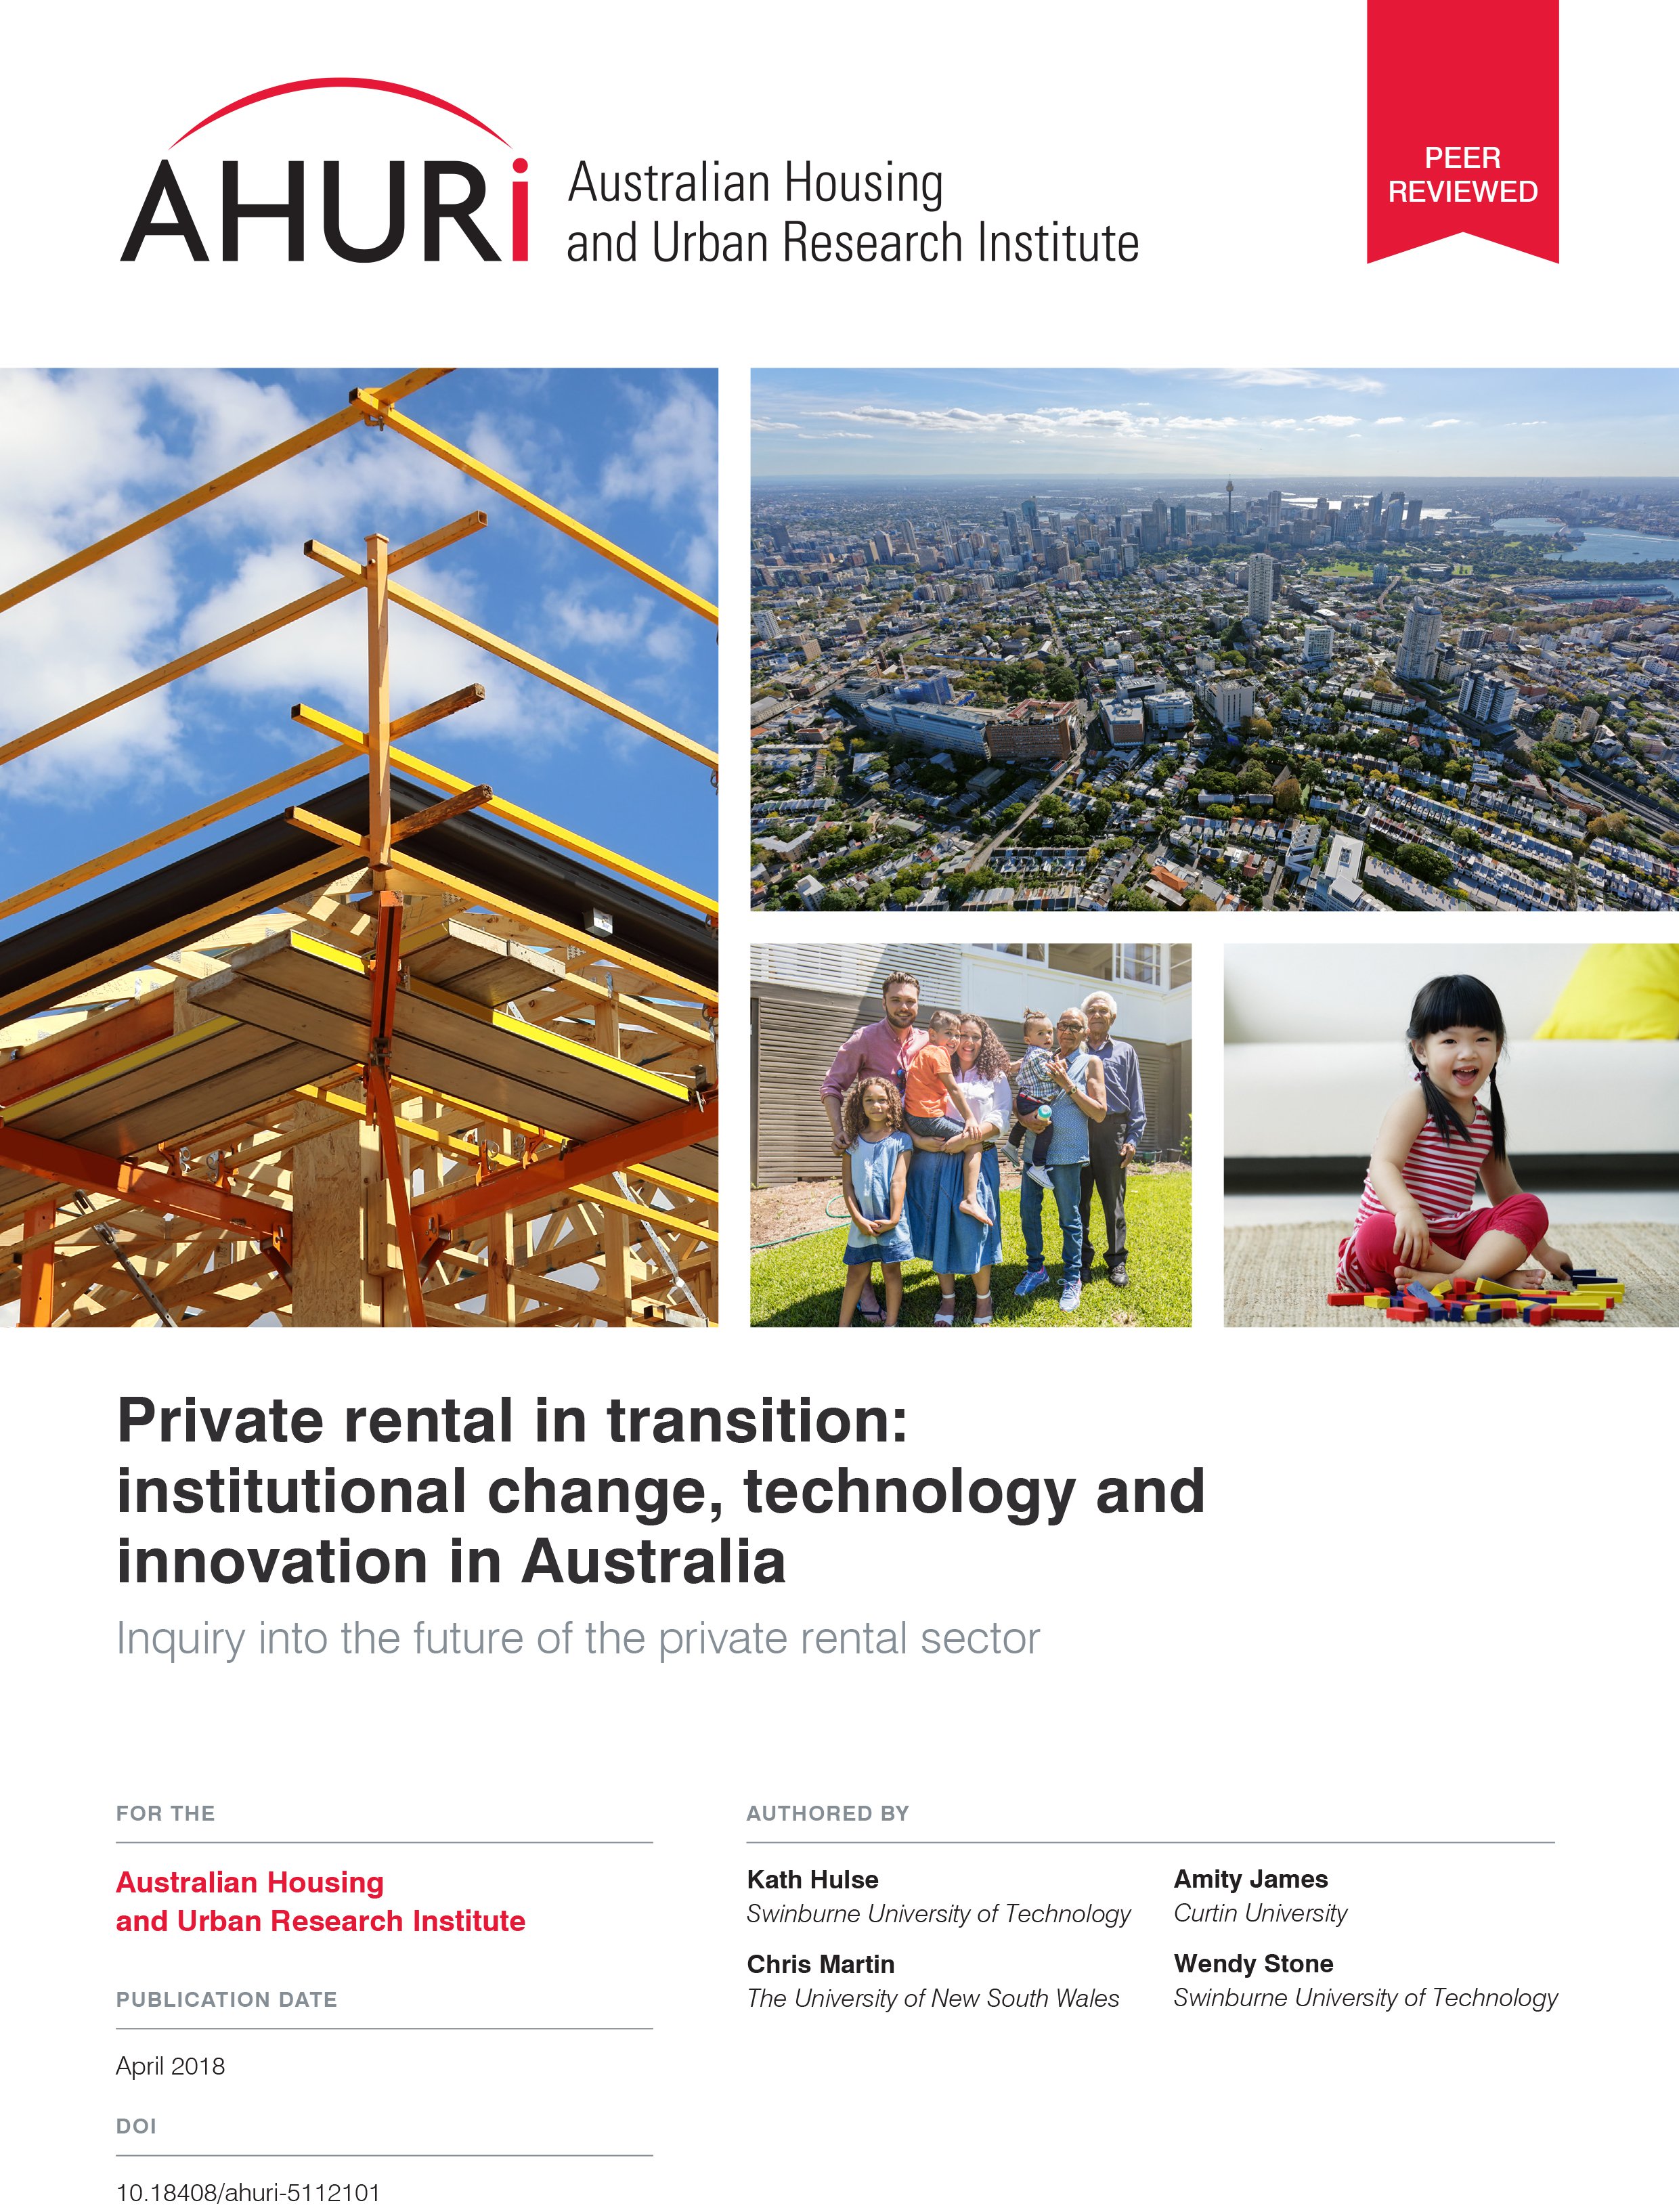 Final Report - The institutional dynamics of the Australian private rental sector: prospects and opportunities